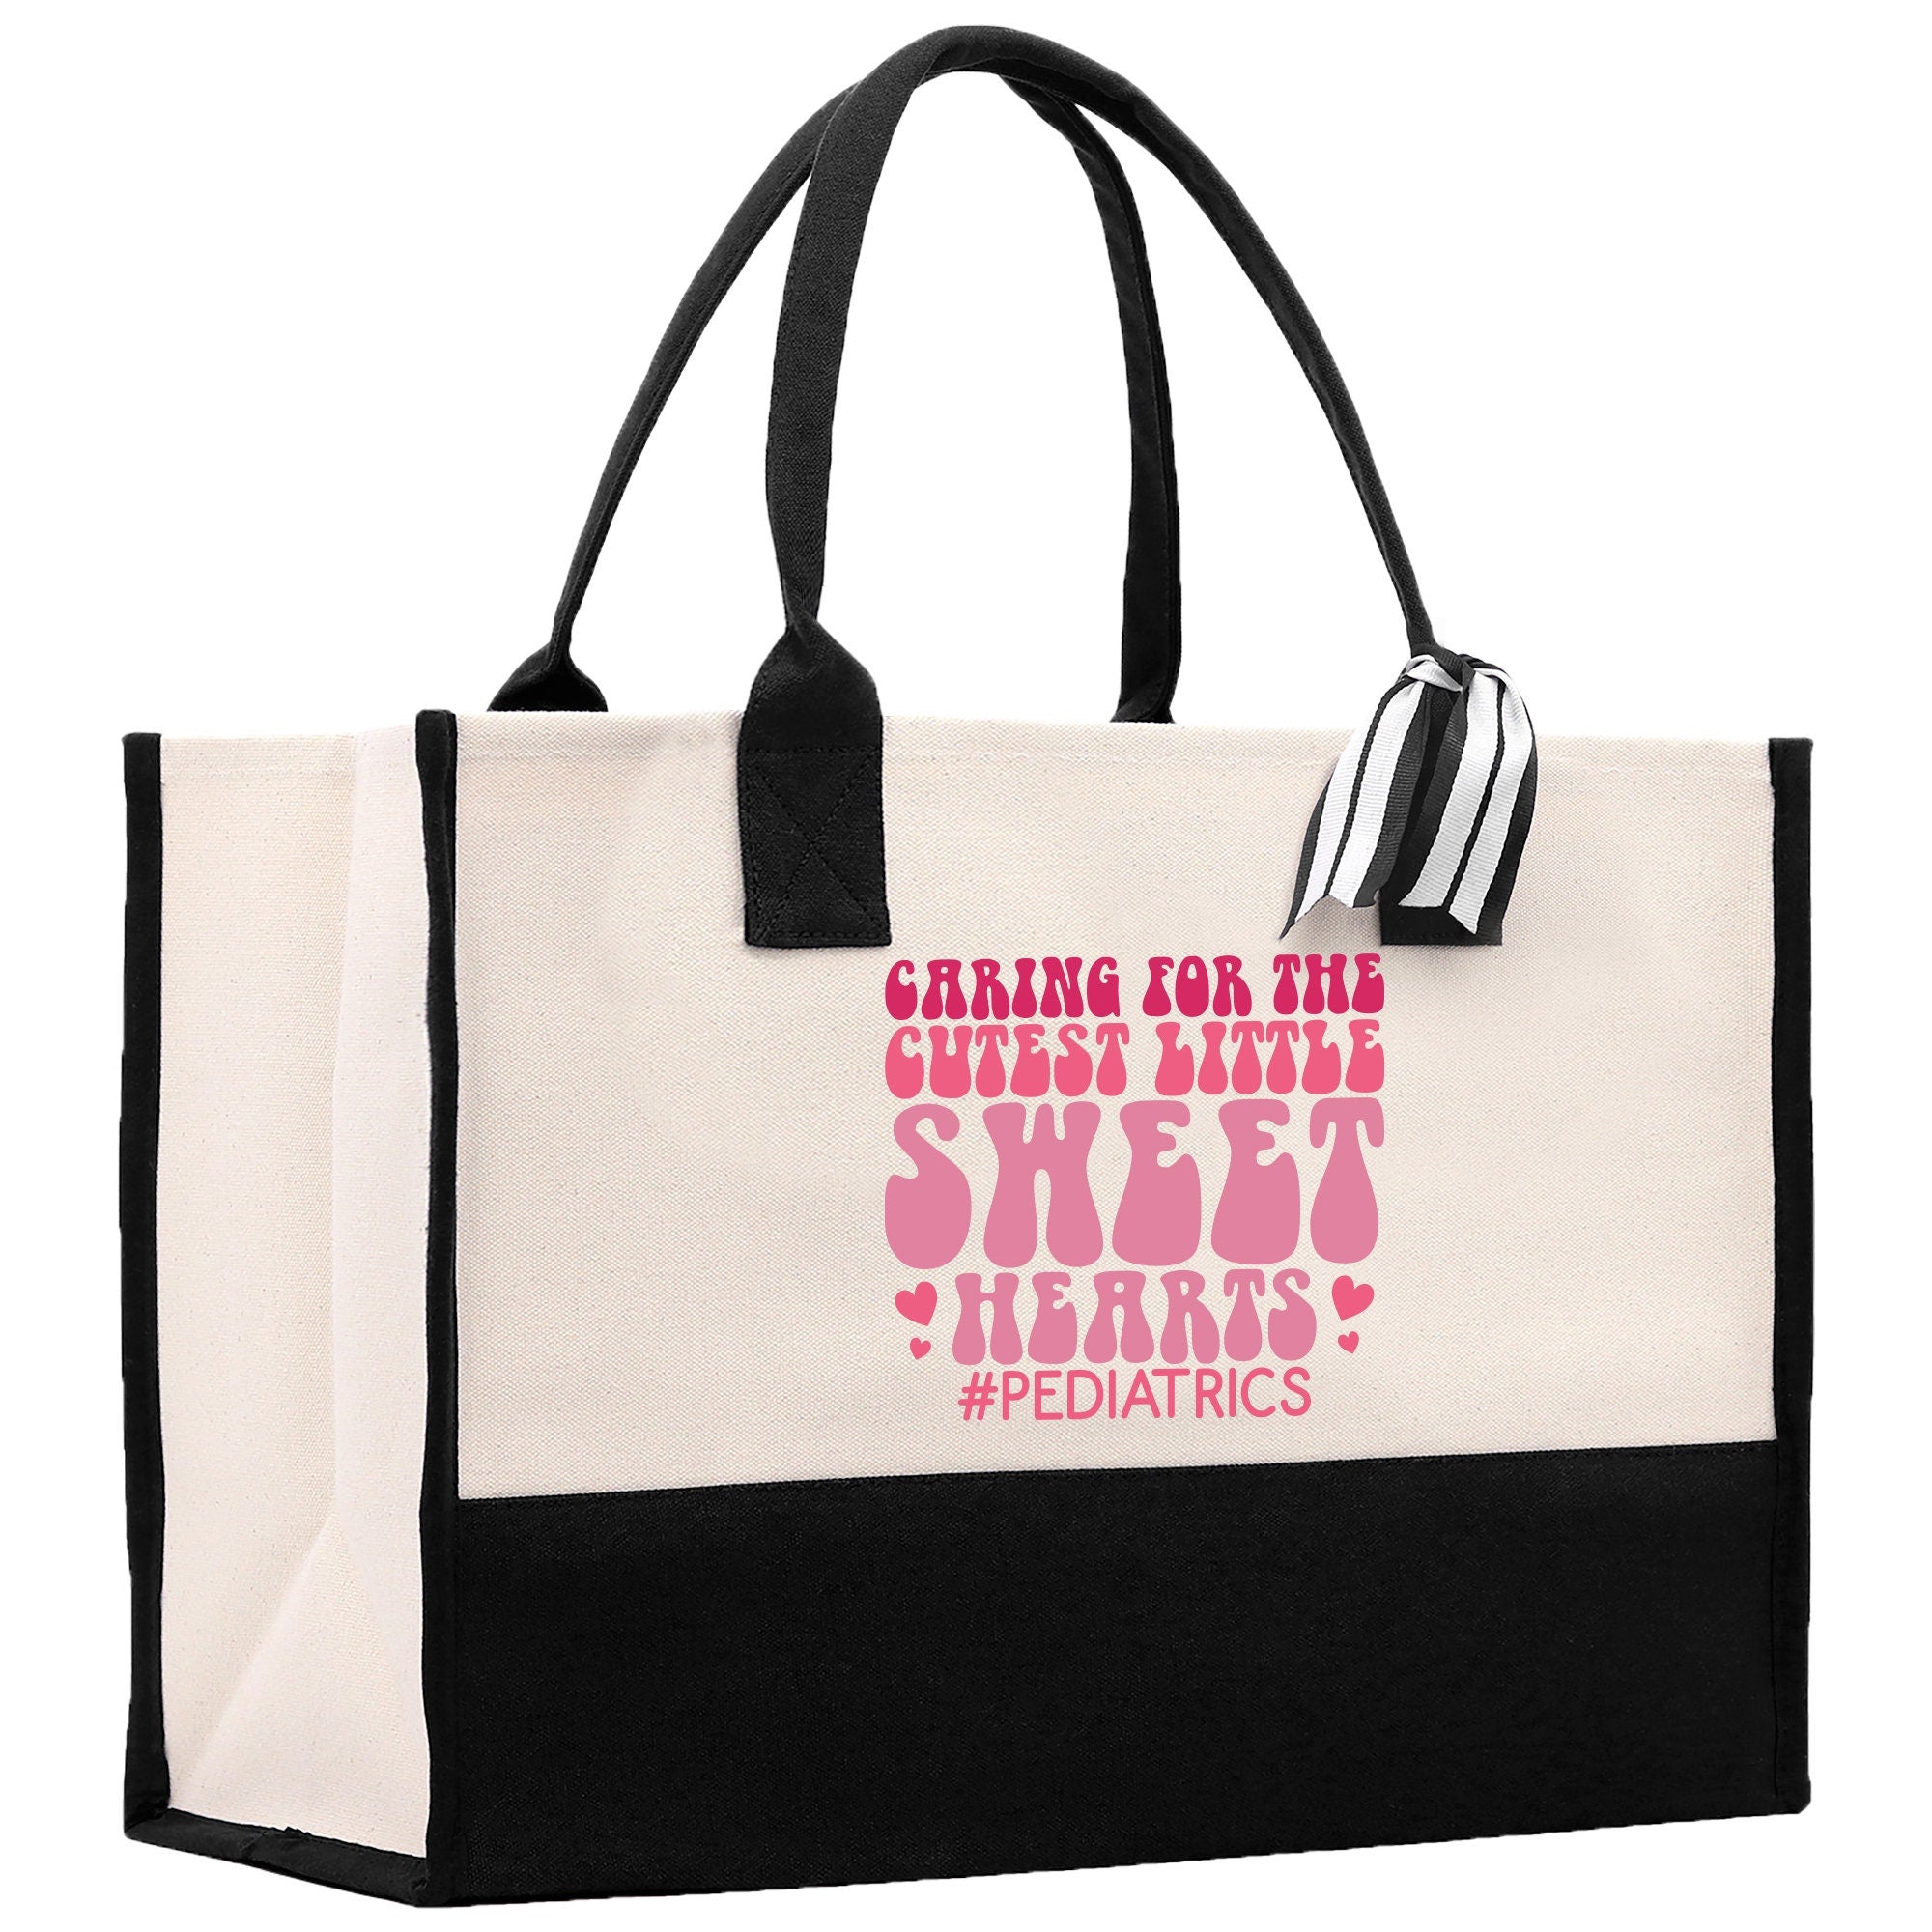 a black and white shopping bag with pink lettering